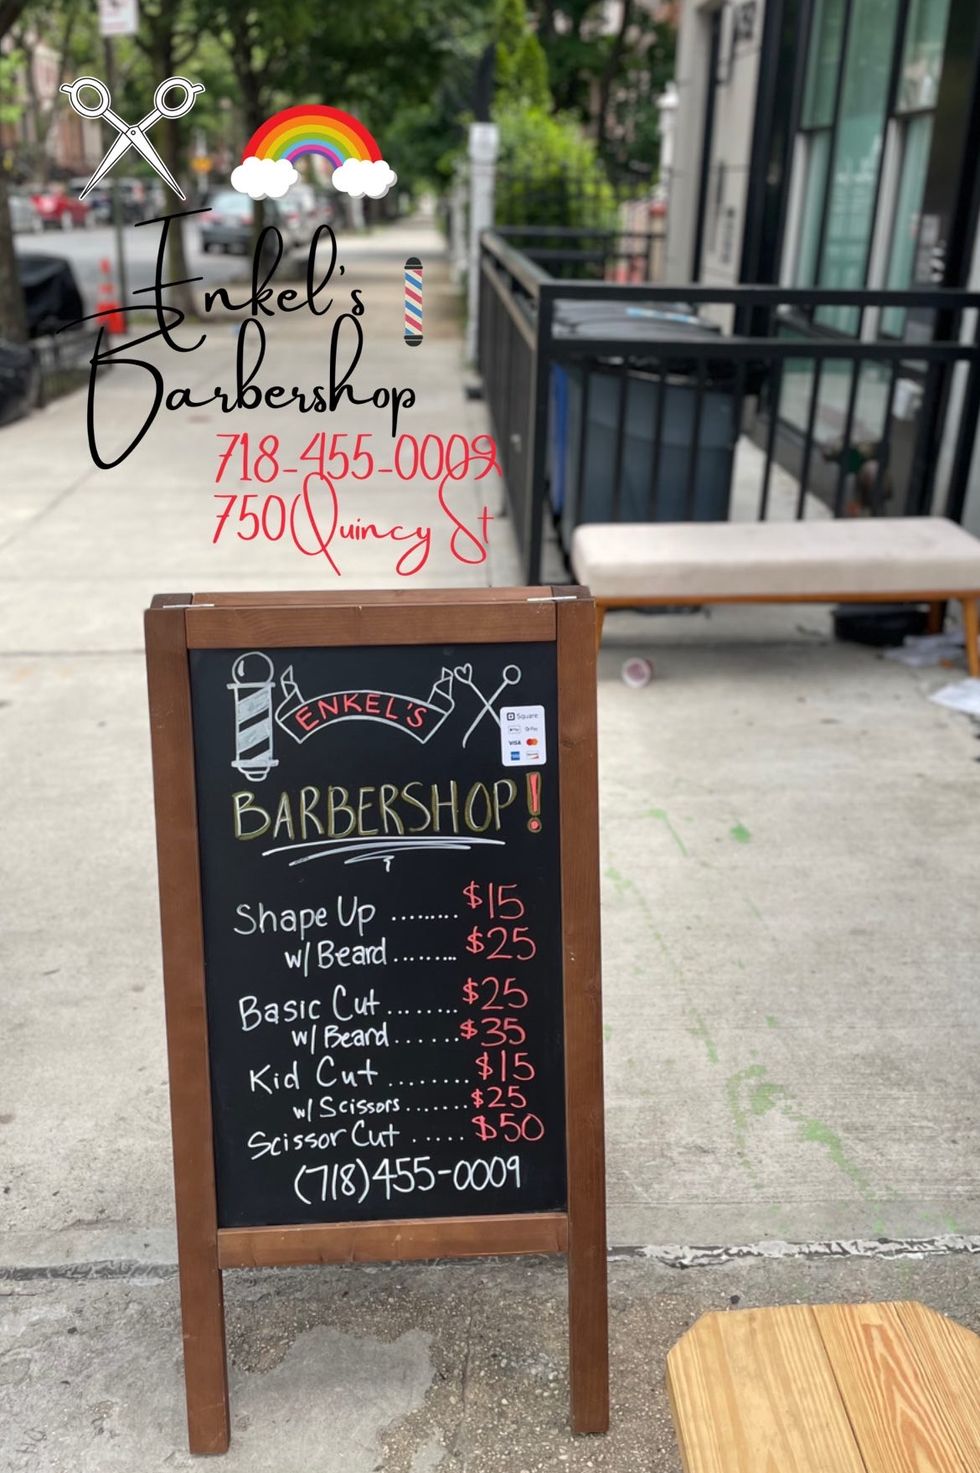 a street placard outside of enkel's barbershop displaying prices for haircuts